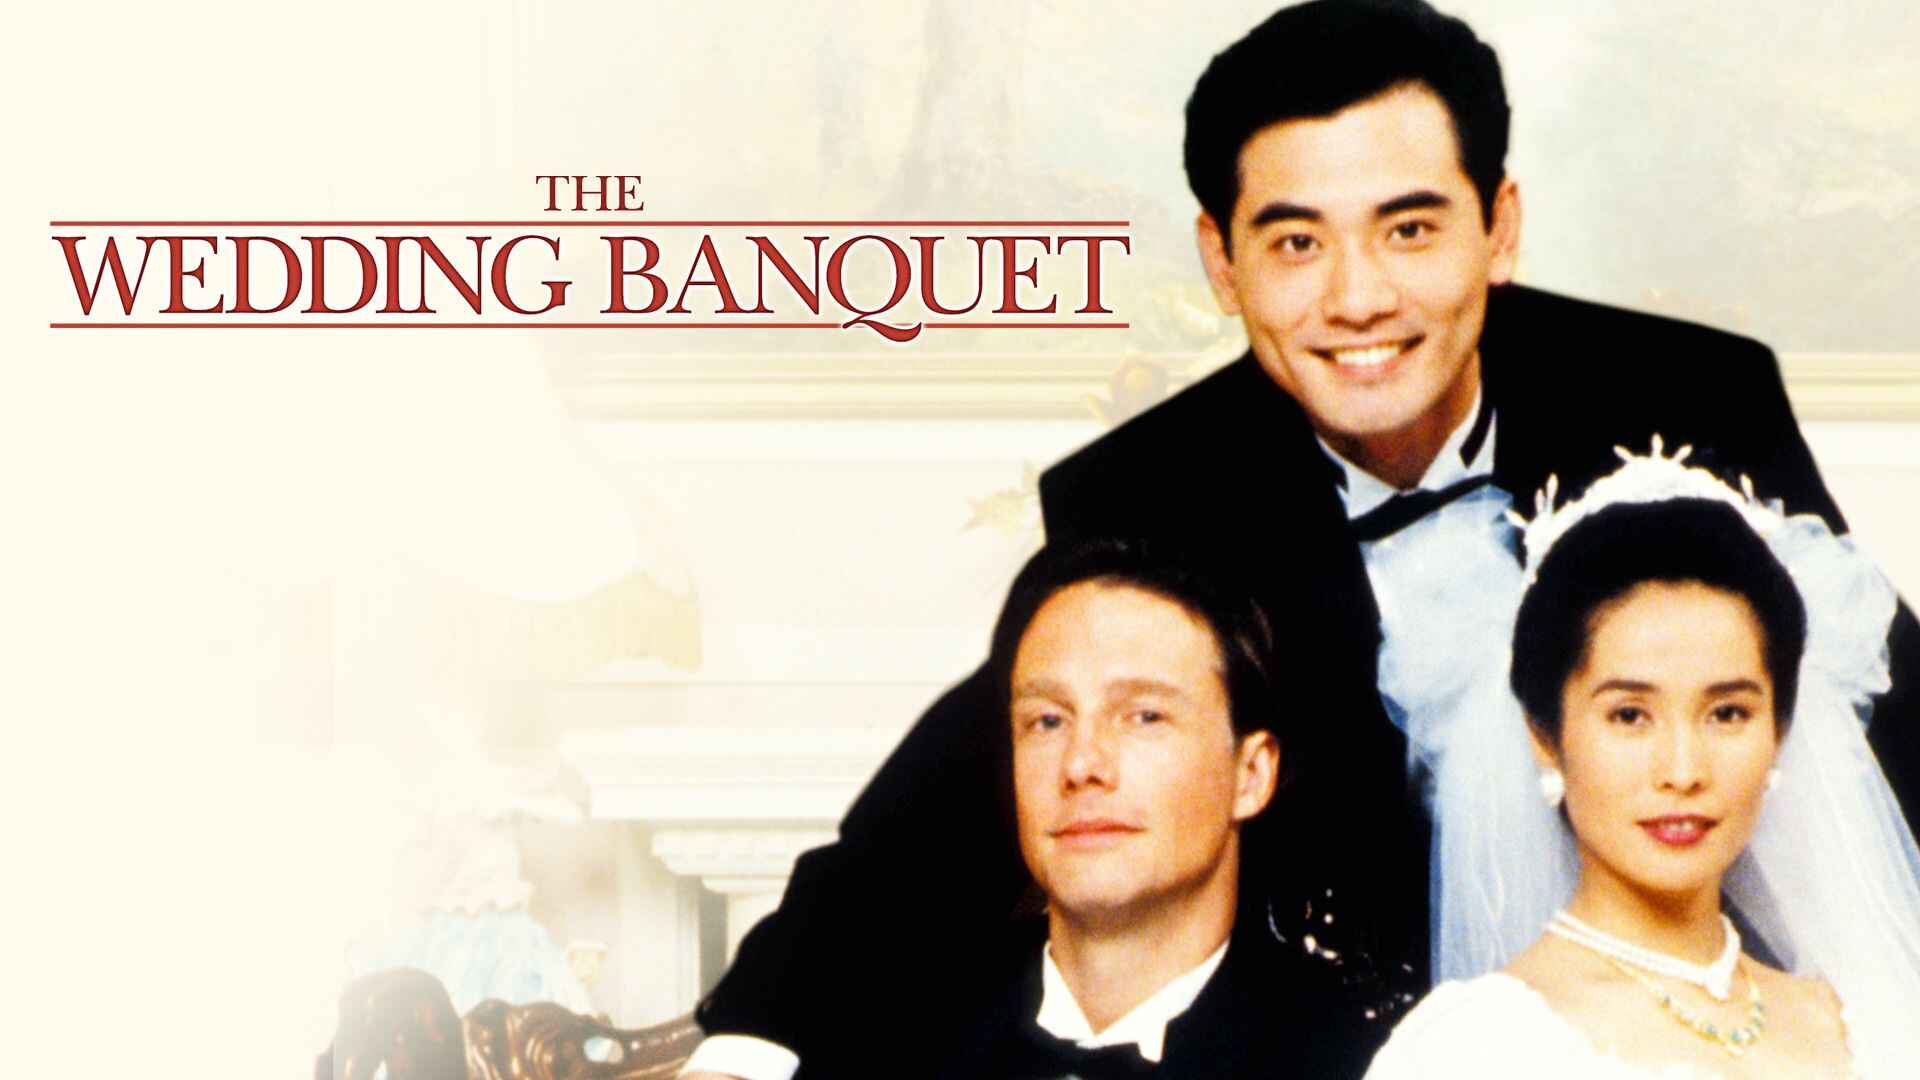 Teaser Image of The Wedding Banquet (1993)